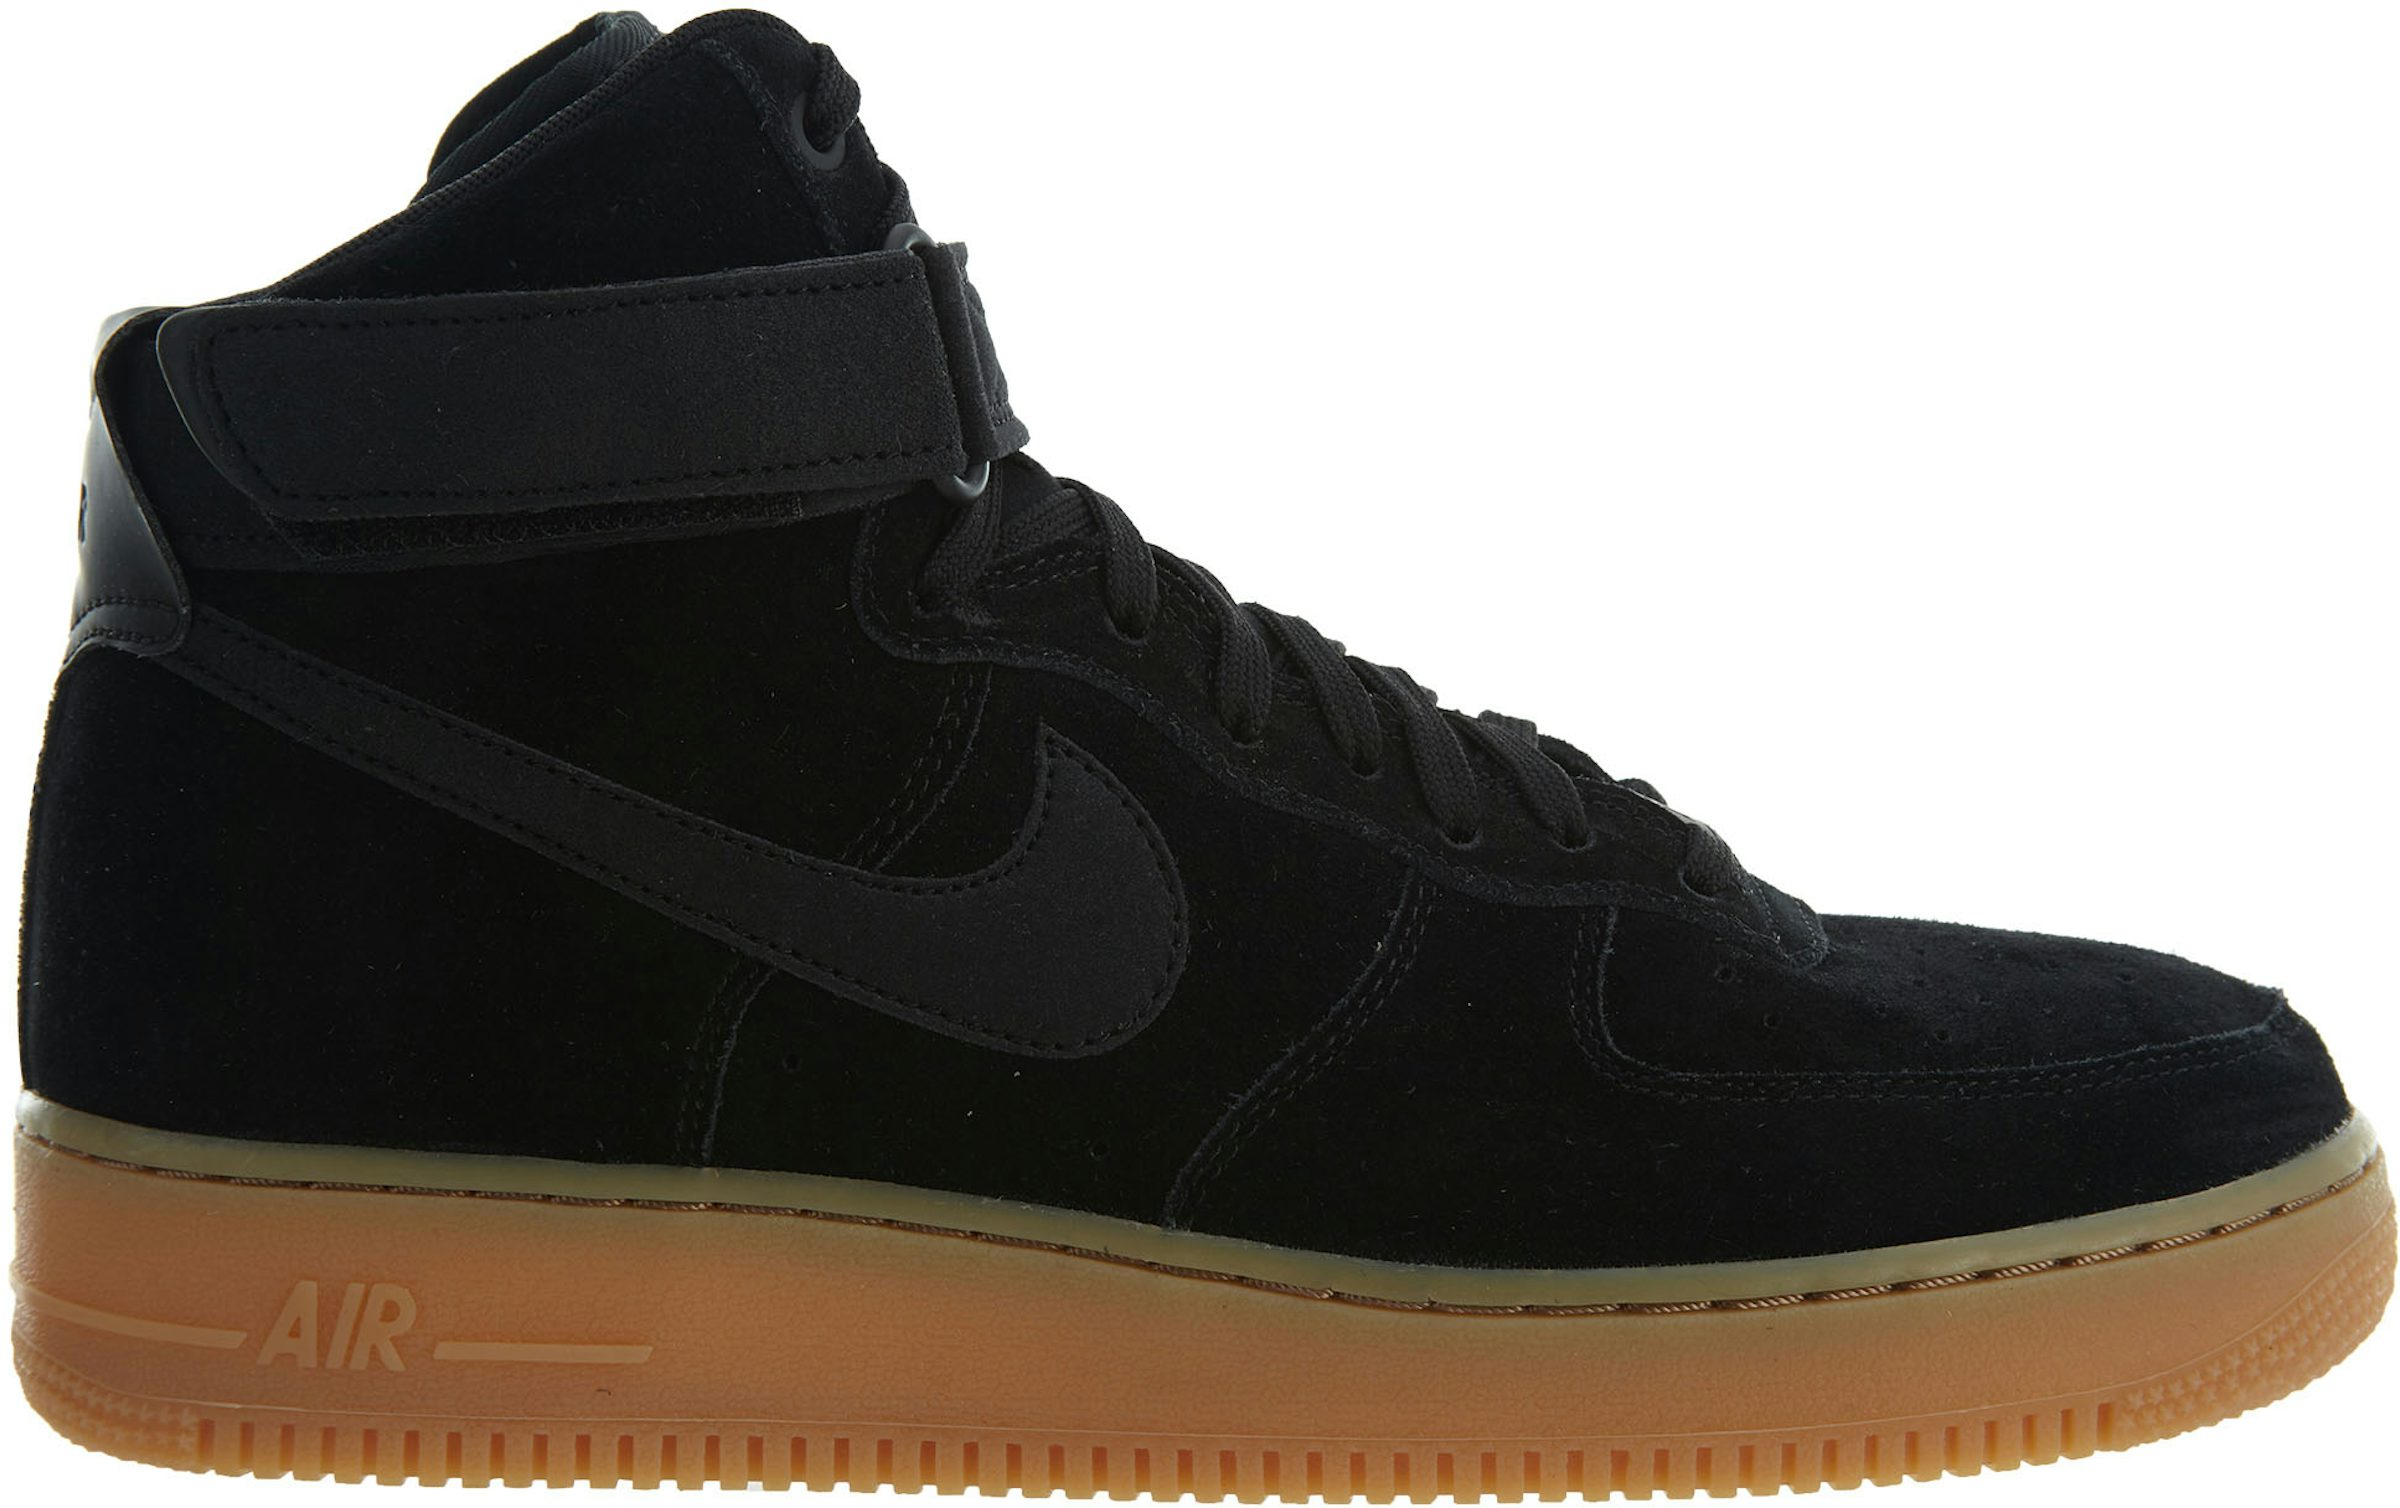 Nike Air Force 1 Black & Yellow Suede Hot Flame Sneakers 